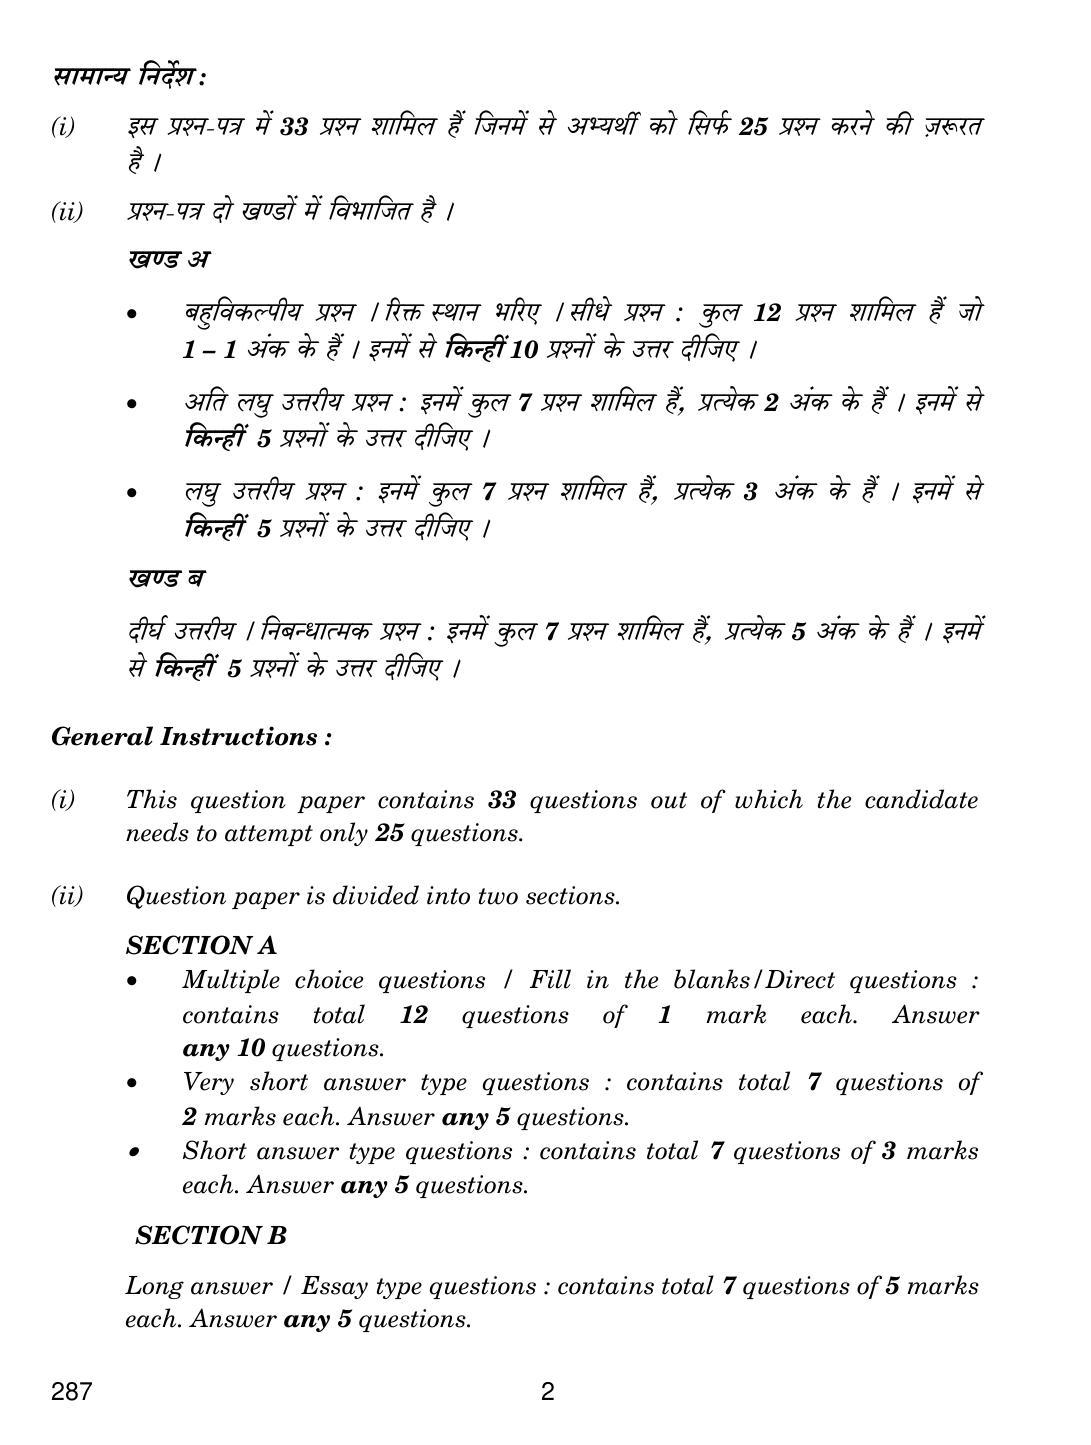 CBSE Class 12 287 Olericulture 2019 Question Paper - Page 2